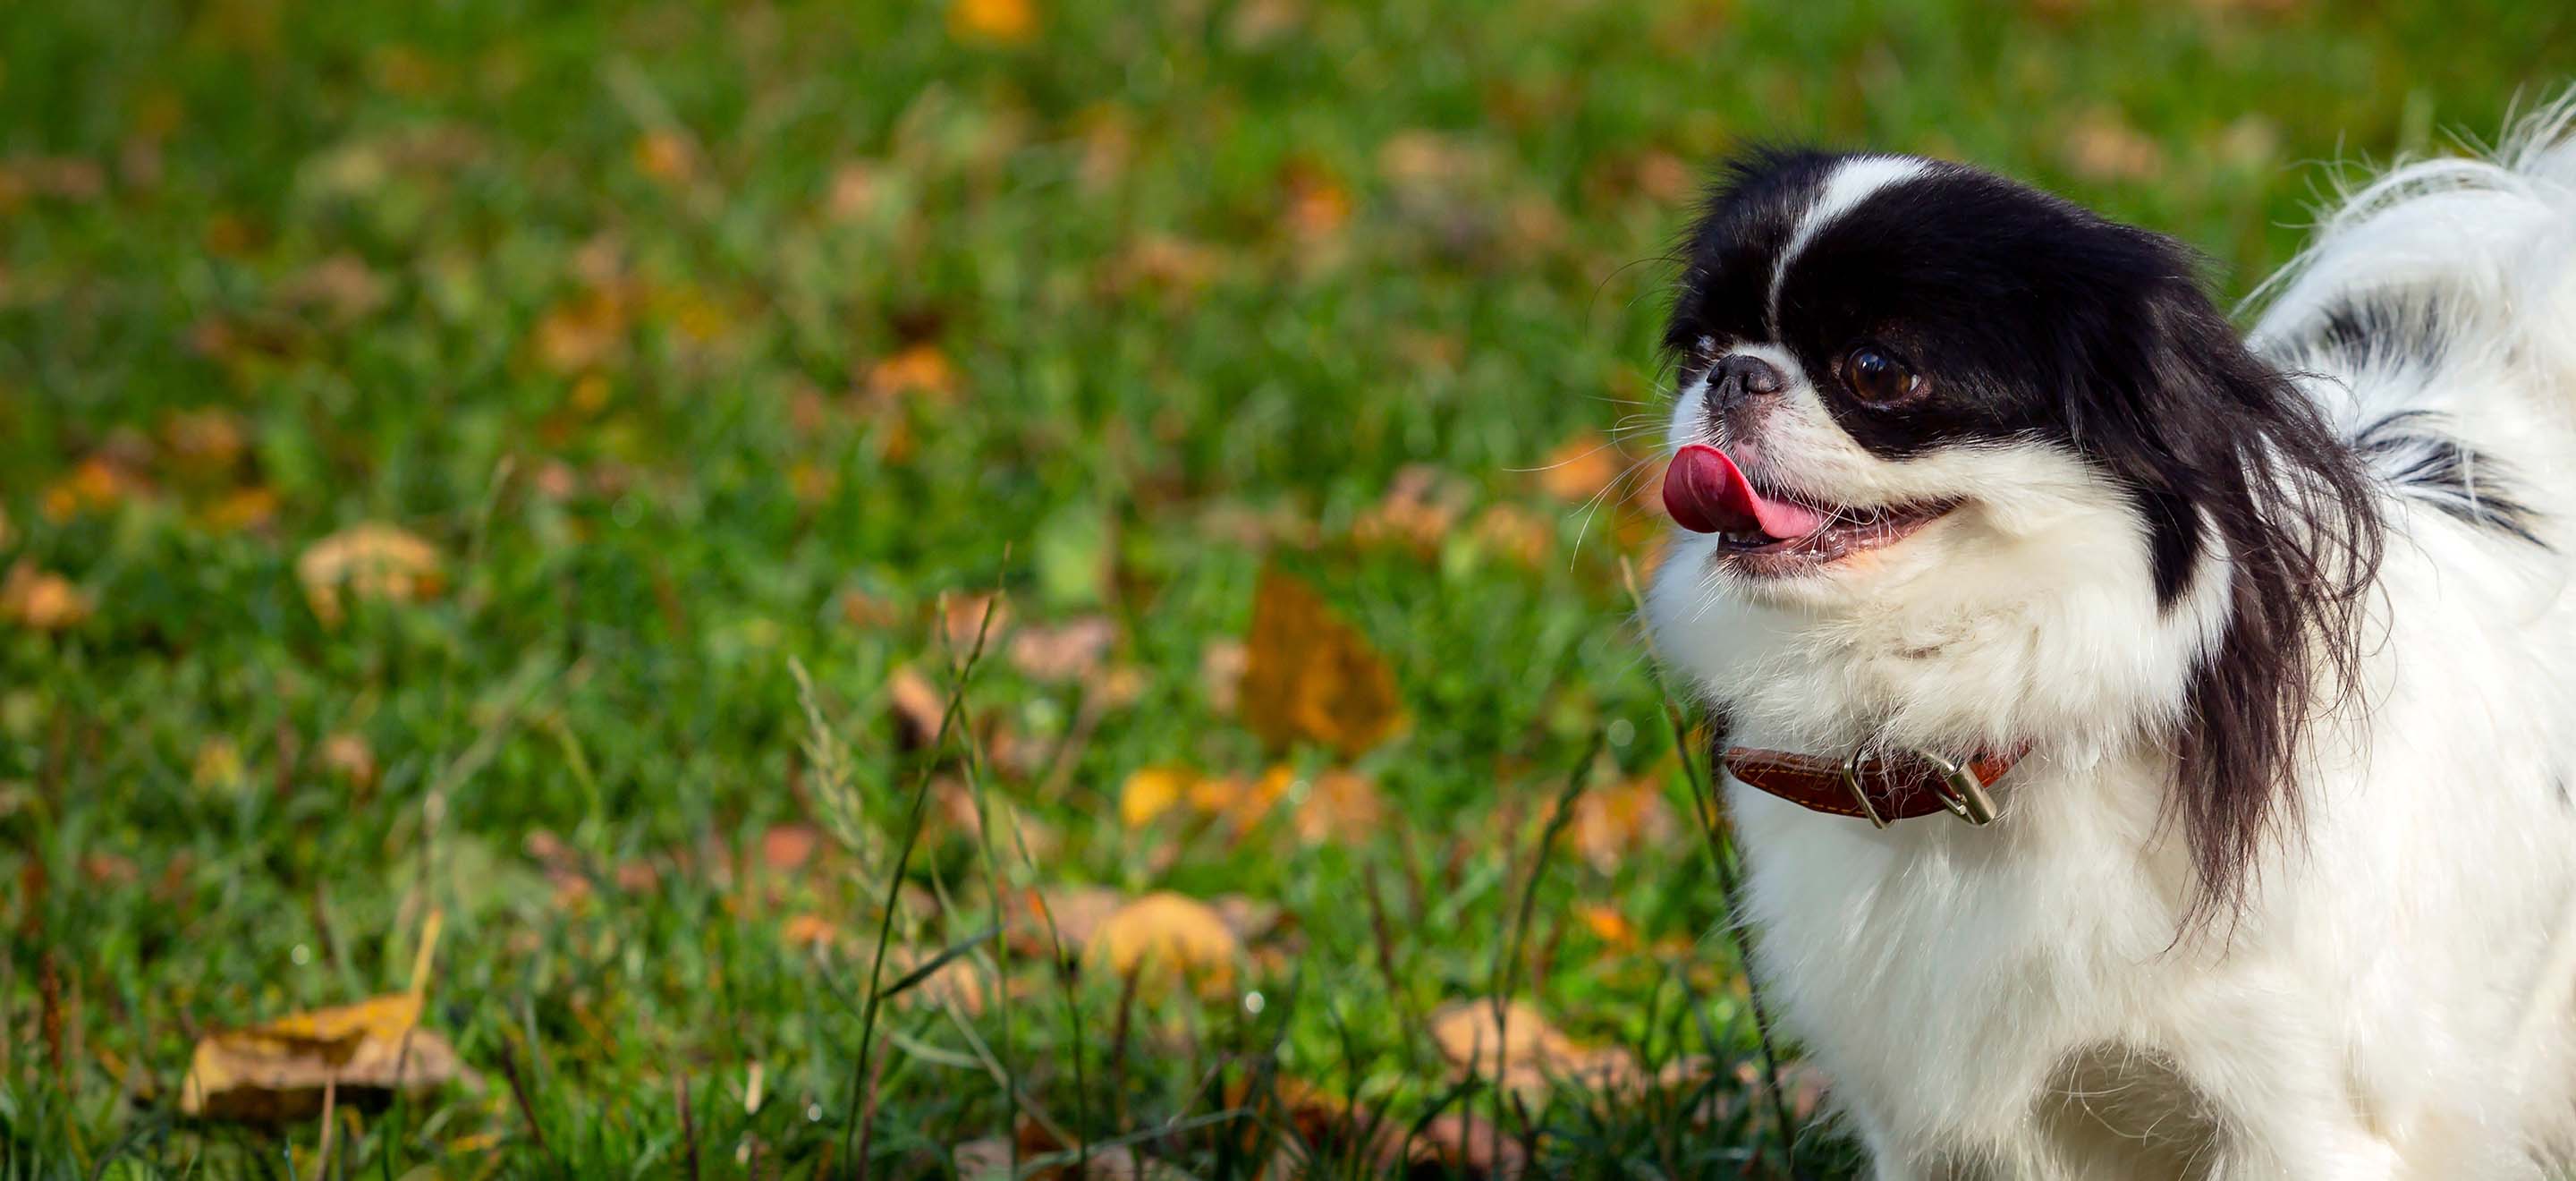 A black and white Japanese Chin dog standing in a yard littered with with fallen leaves image